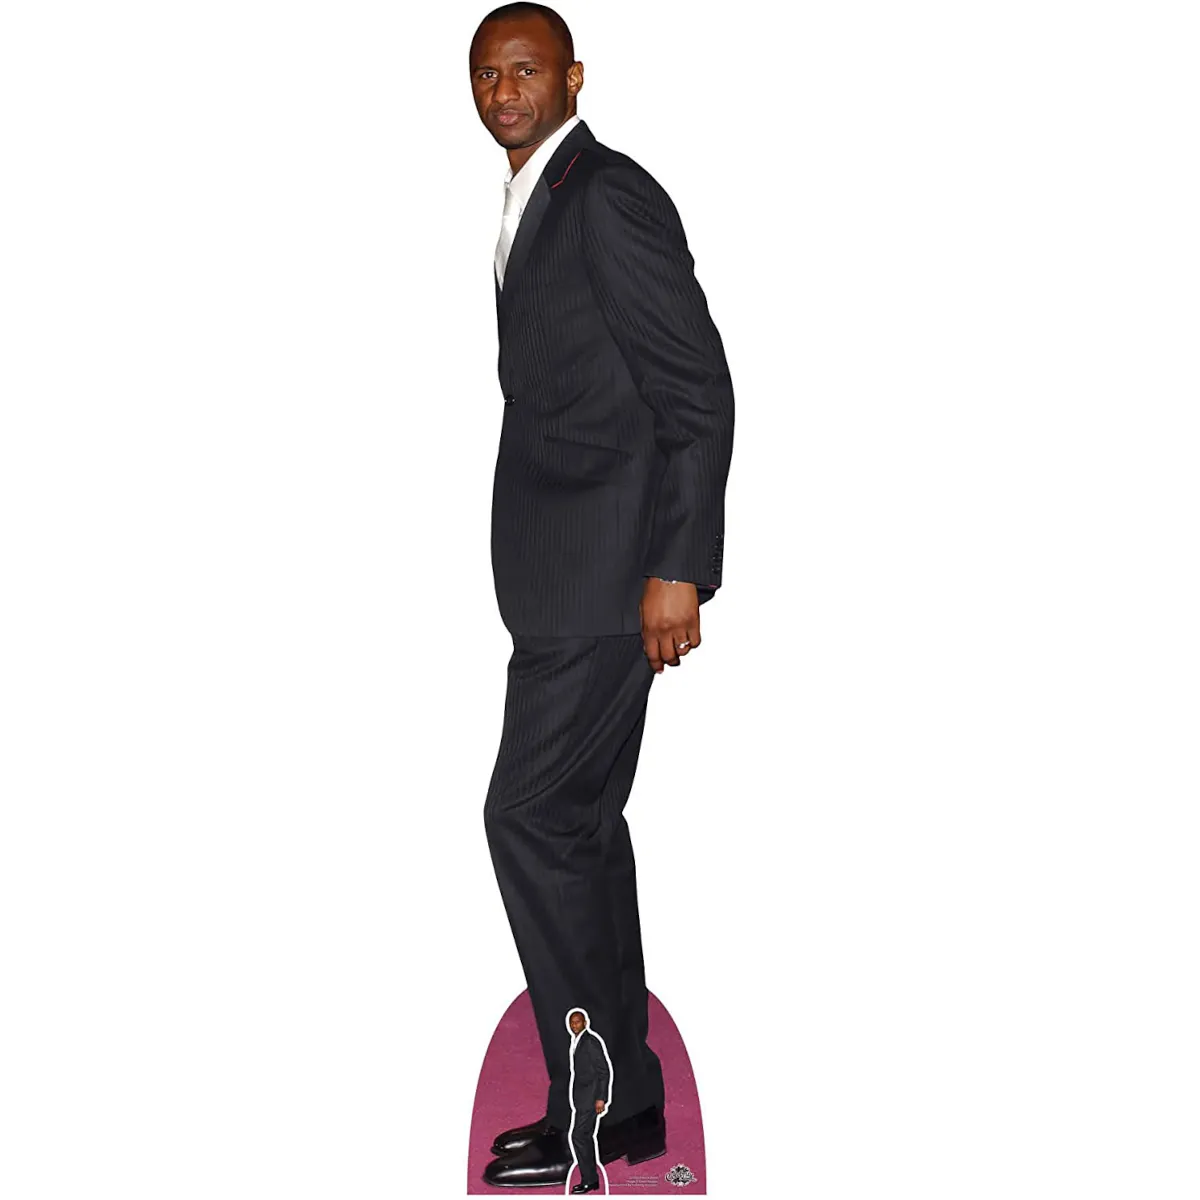 CS965 Patrick Vieira (French Football Manager) Lifesize + Mini Cardboard Cutout Standee Front